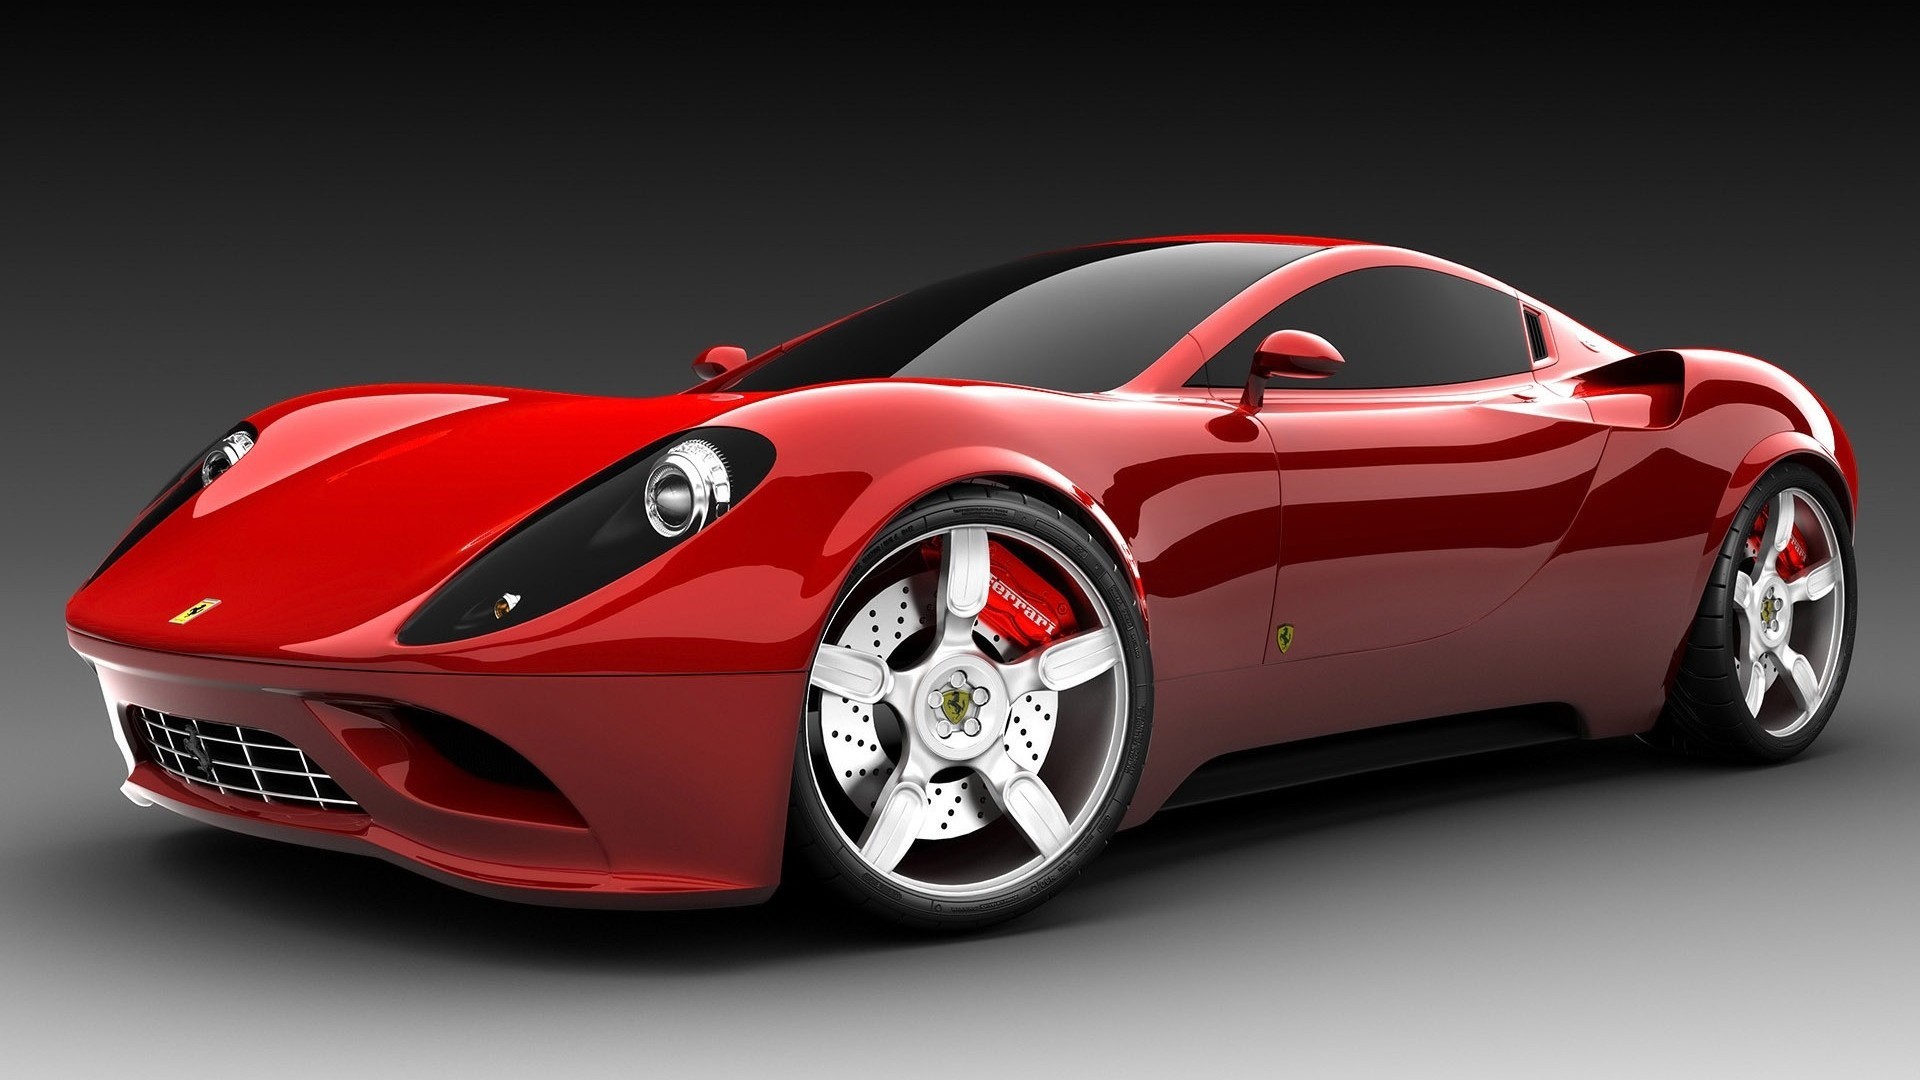 Red sports car with white wheels wallpapers and images - wallpapers ...